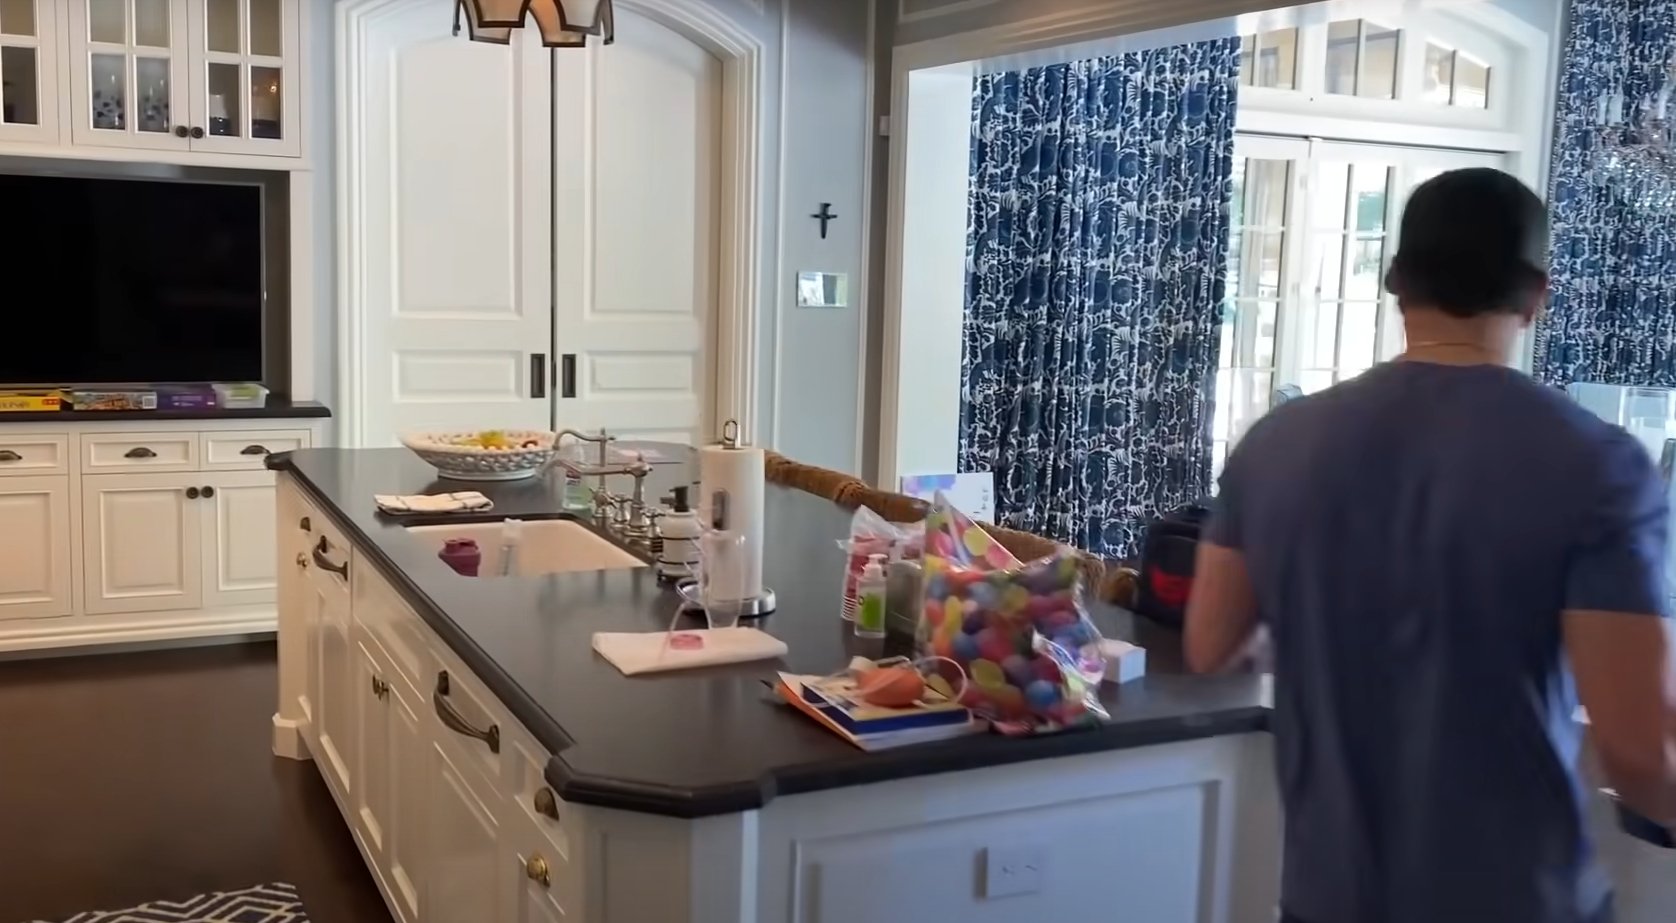 Pictured: Mark Wahlberg's kitchen featured during an episode of Men's Health "Gym & Fridge" | Source: YouTube/@MensHealth